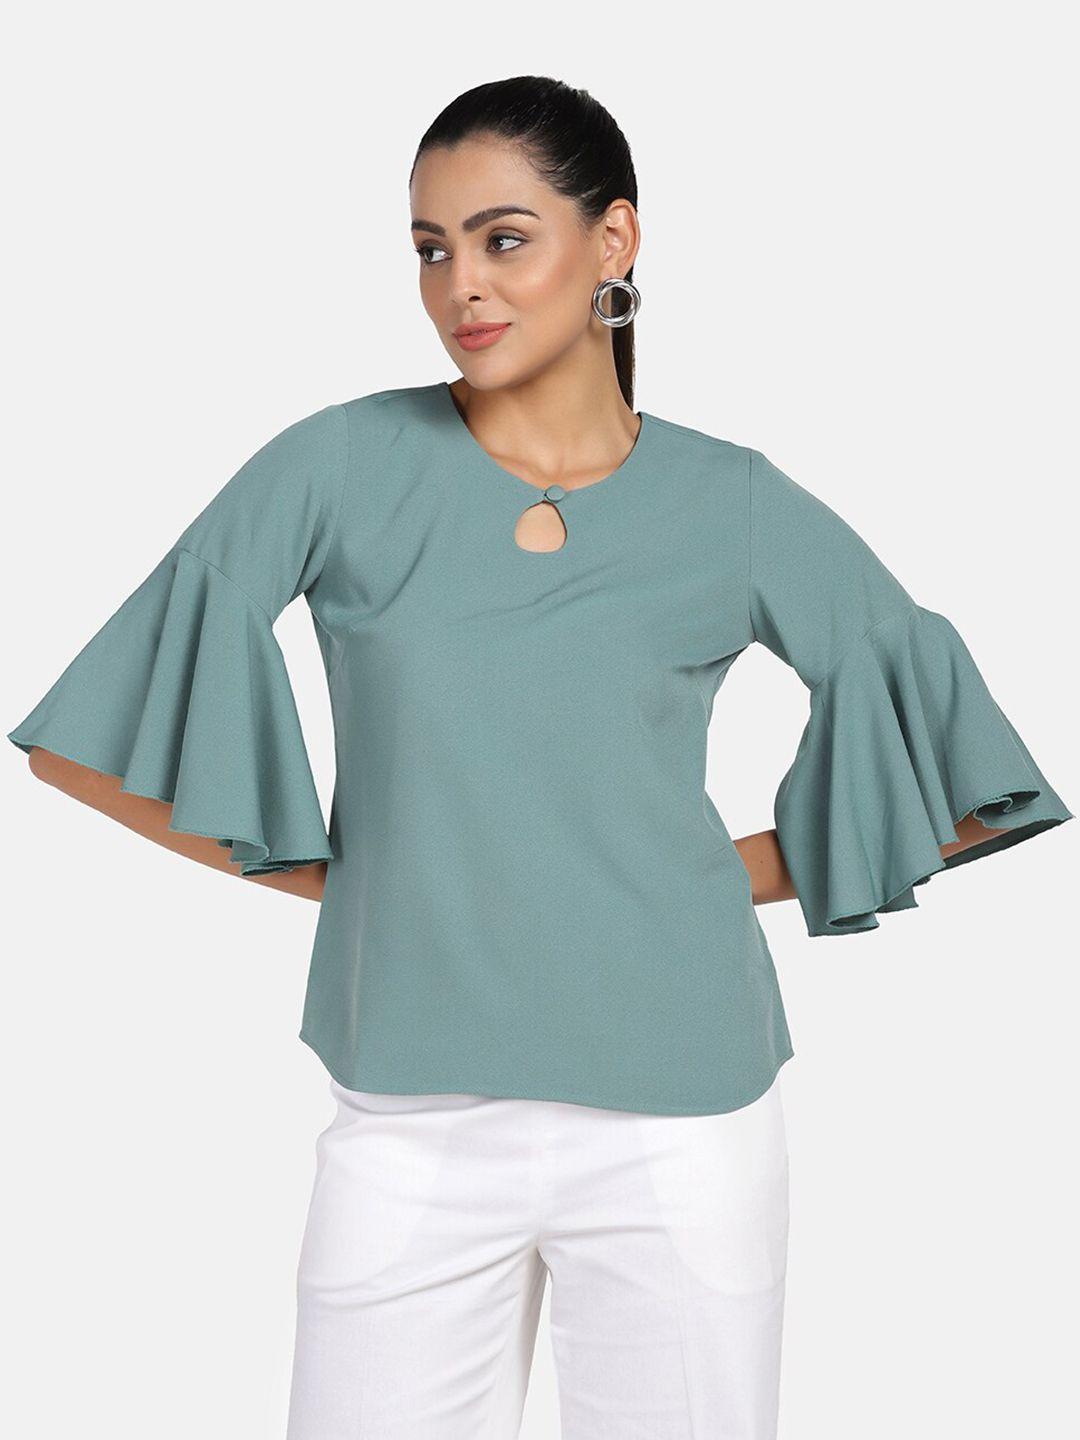 powersutra-green-solid-crepe-top